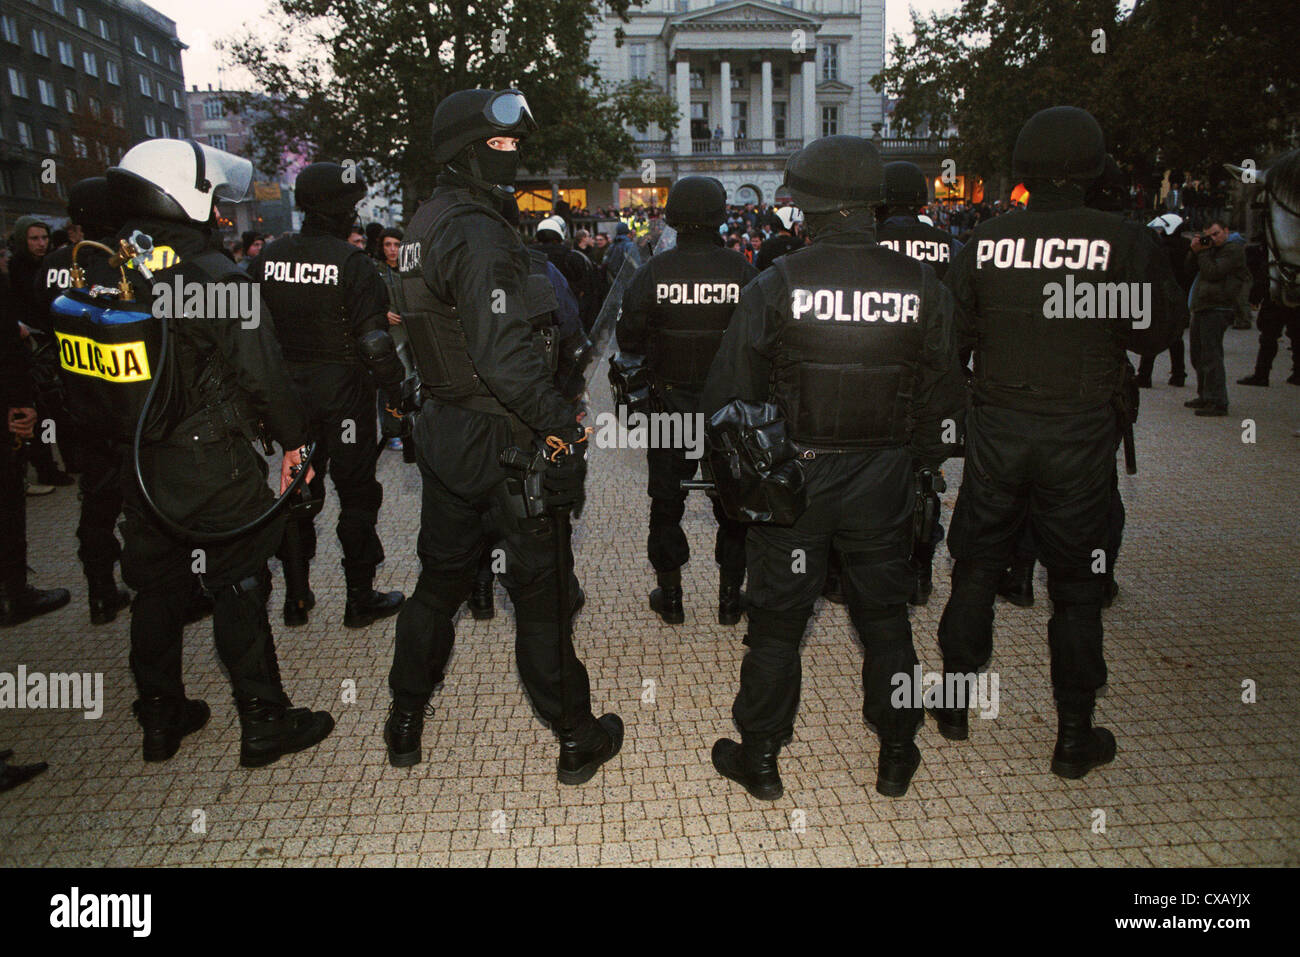 Police during a demonstration in Poznan (Poznan), Poland Stock Photo